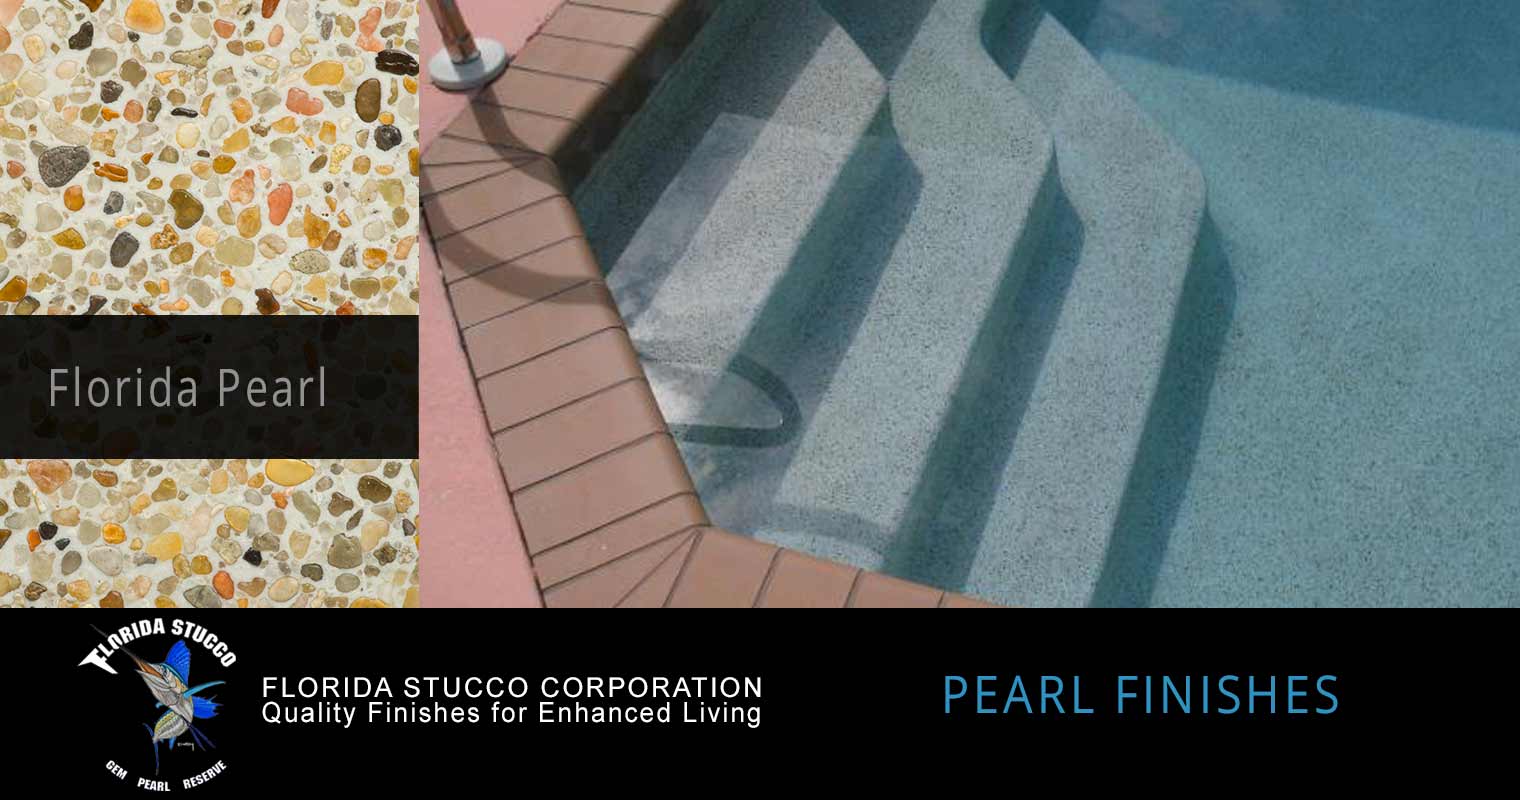 Pearl Finishes, Pool Finishes